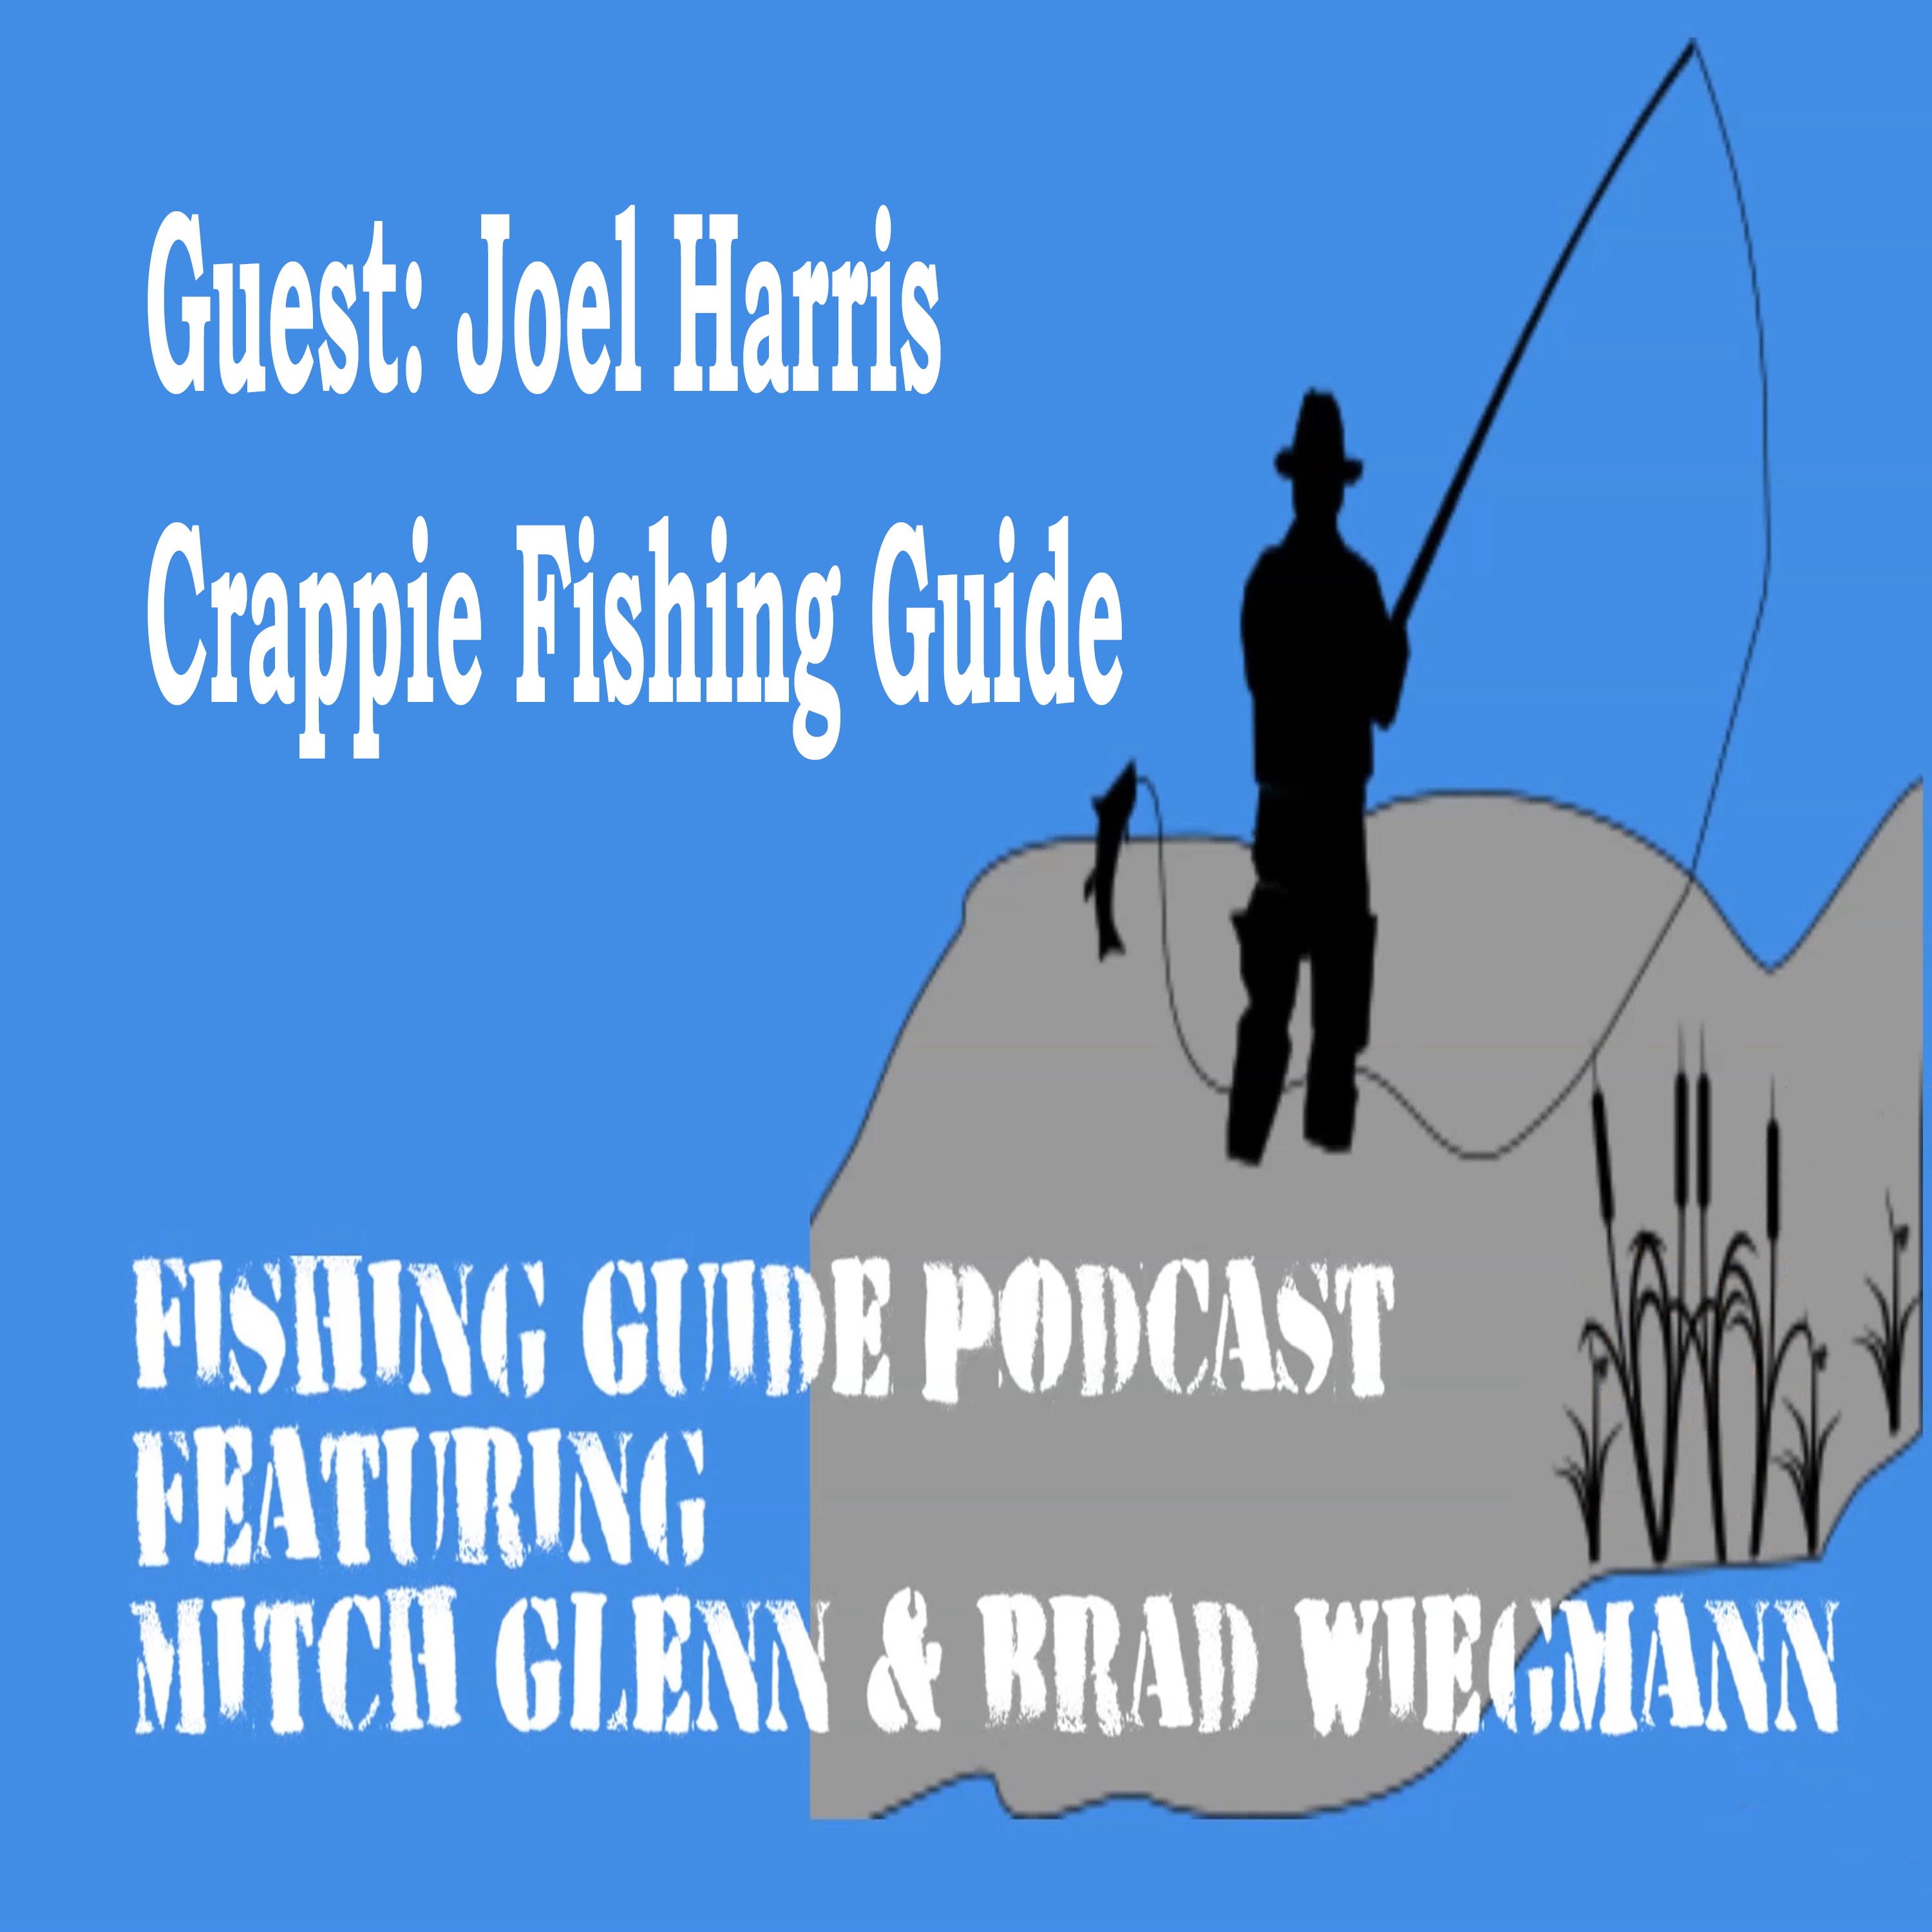 Mississippi crappie fishing guide Joel Harris talks fishing techniques for catching crappie: Episode 14